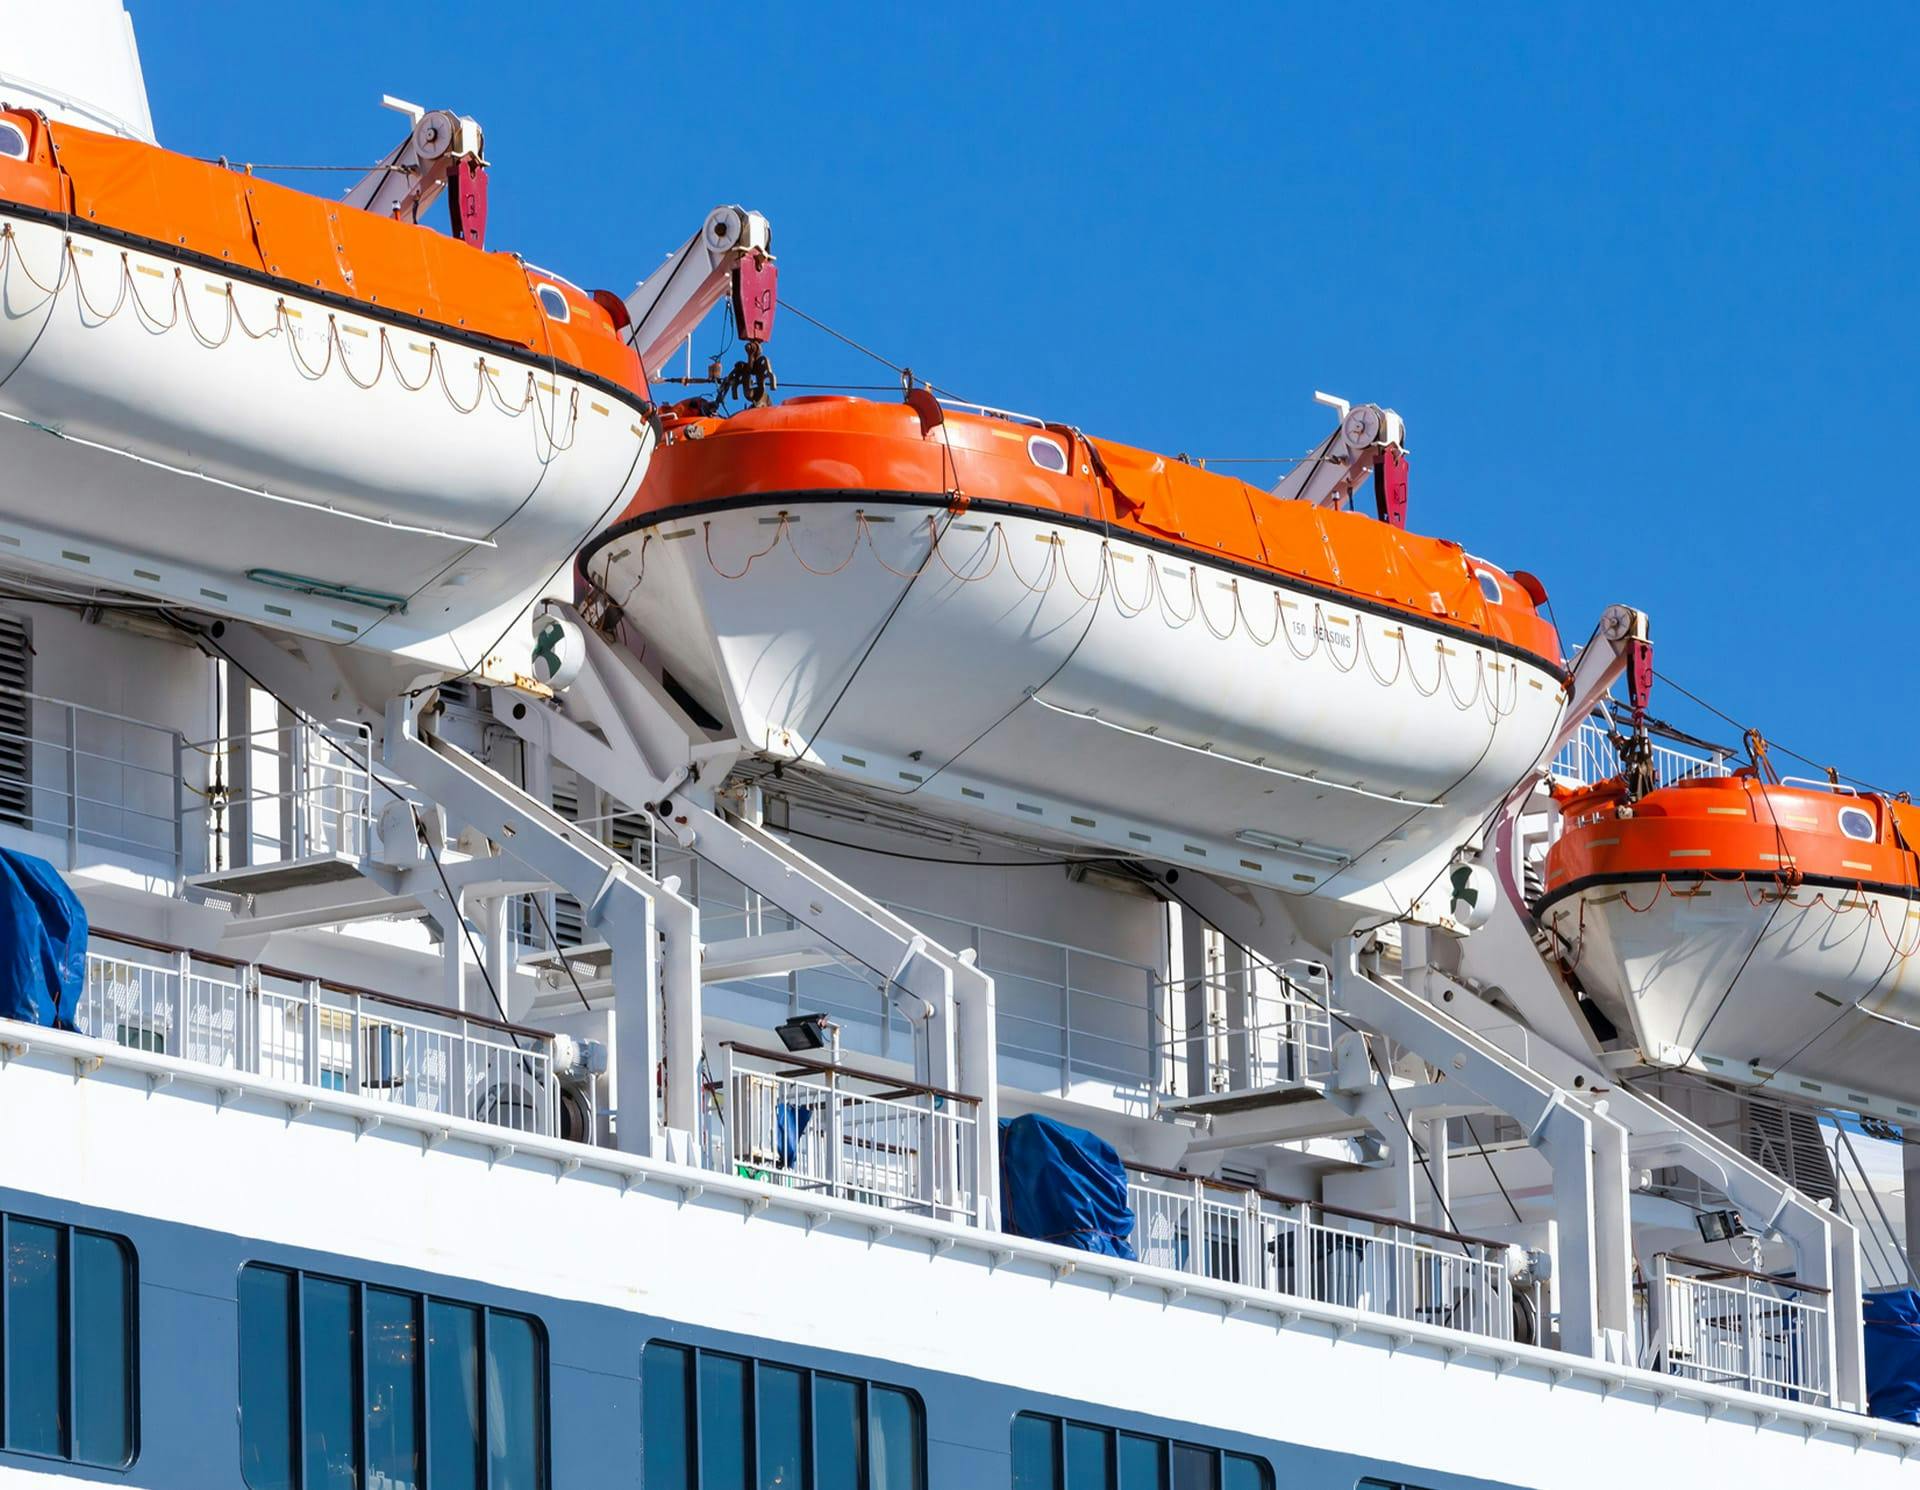 Lifeboats on a cruise ship